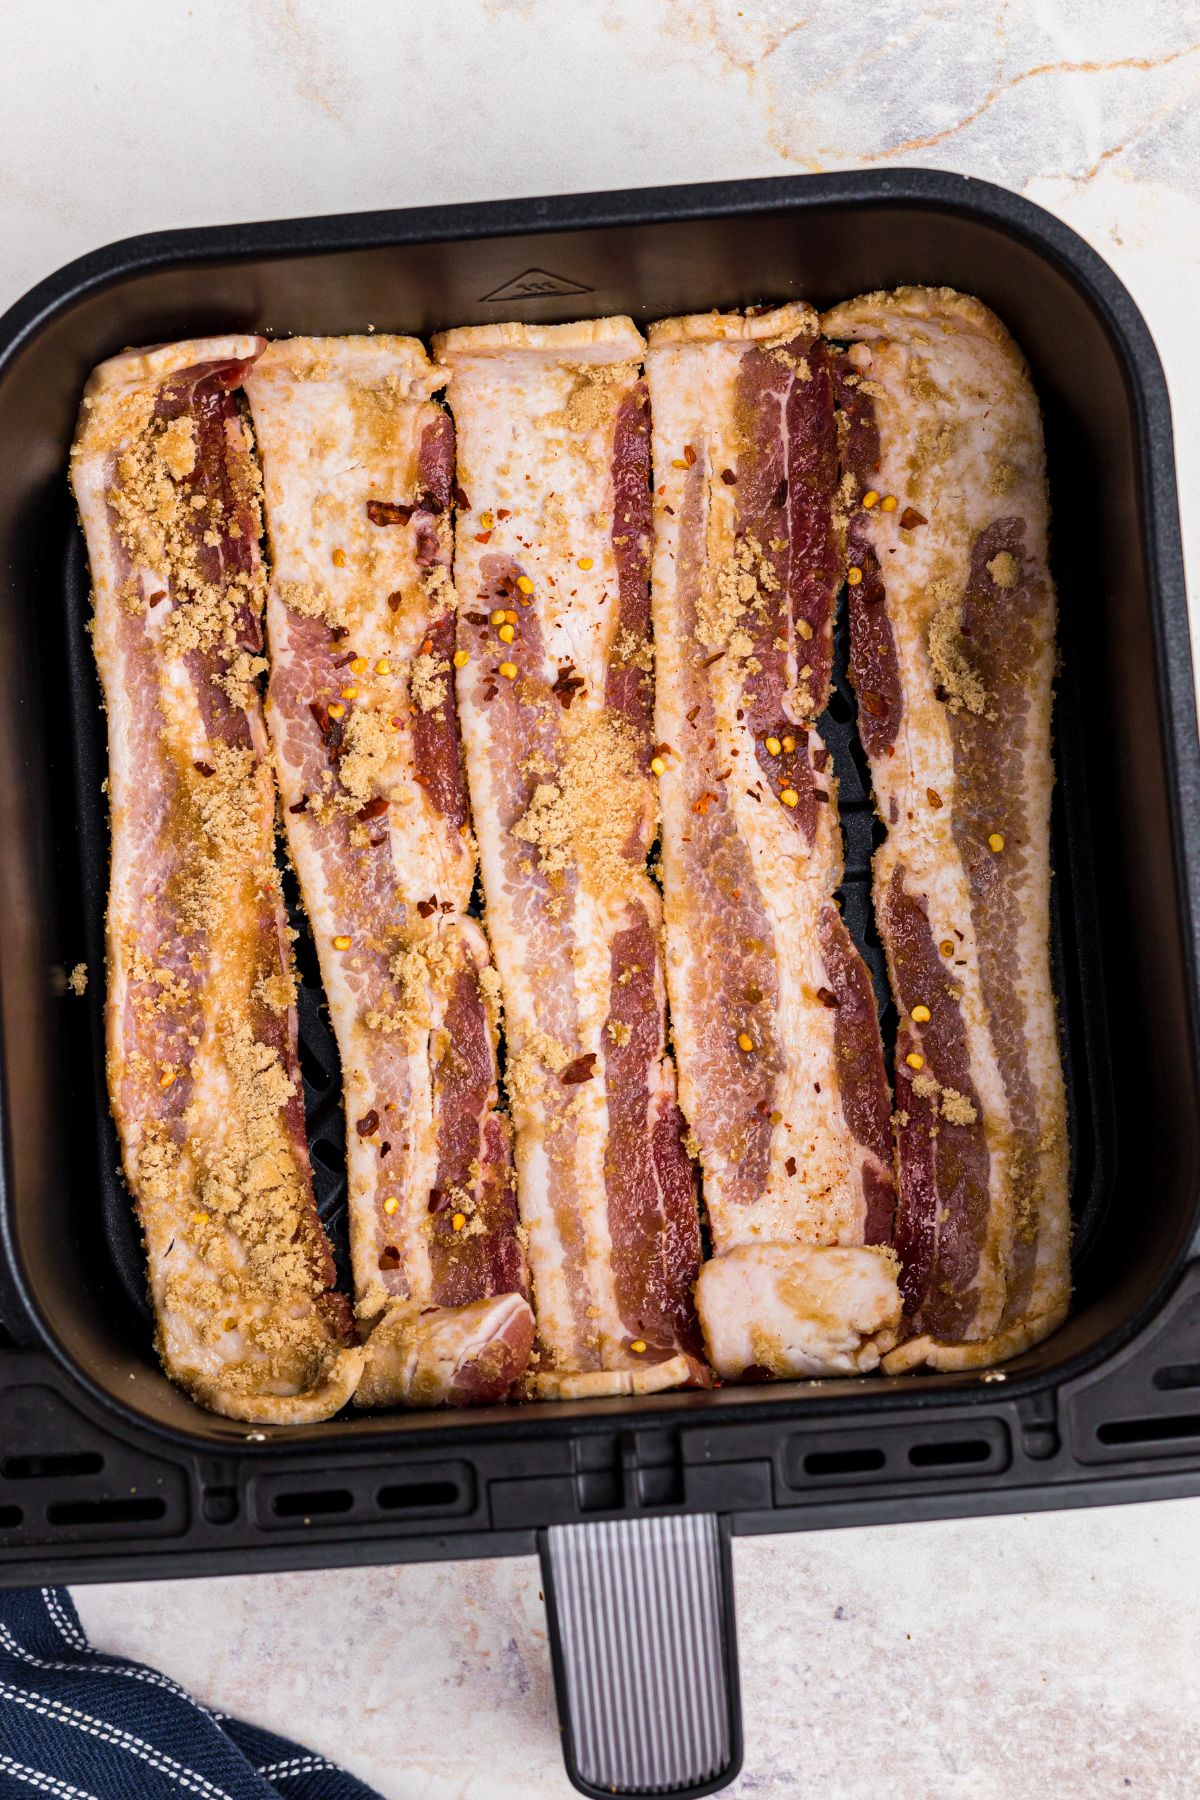 Brown sugar coated thick bacon slices in an air fryer basket.